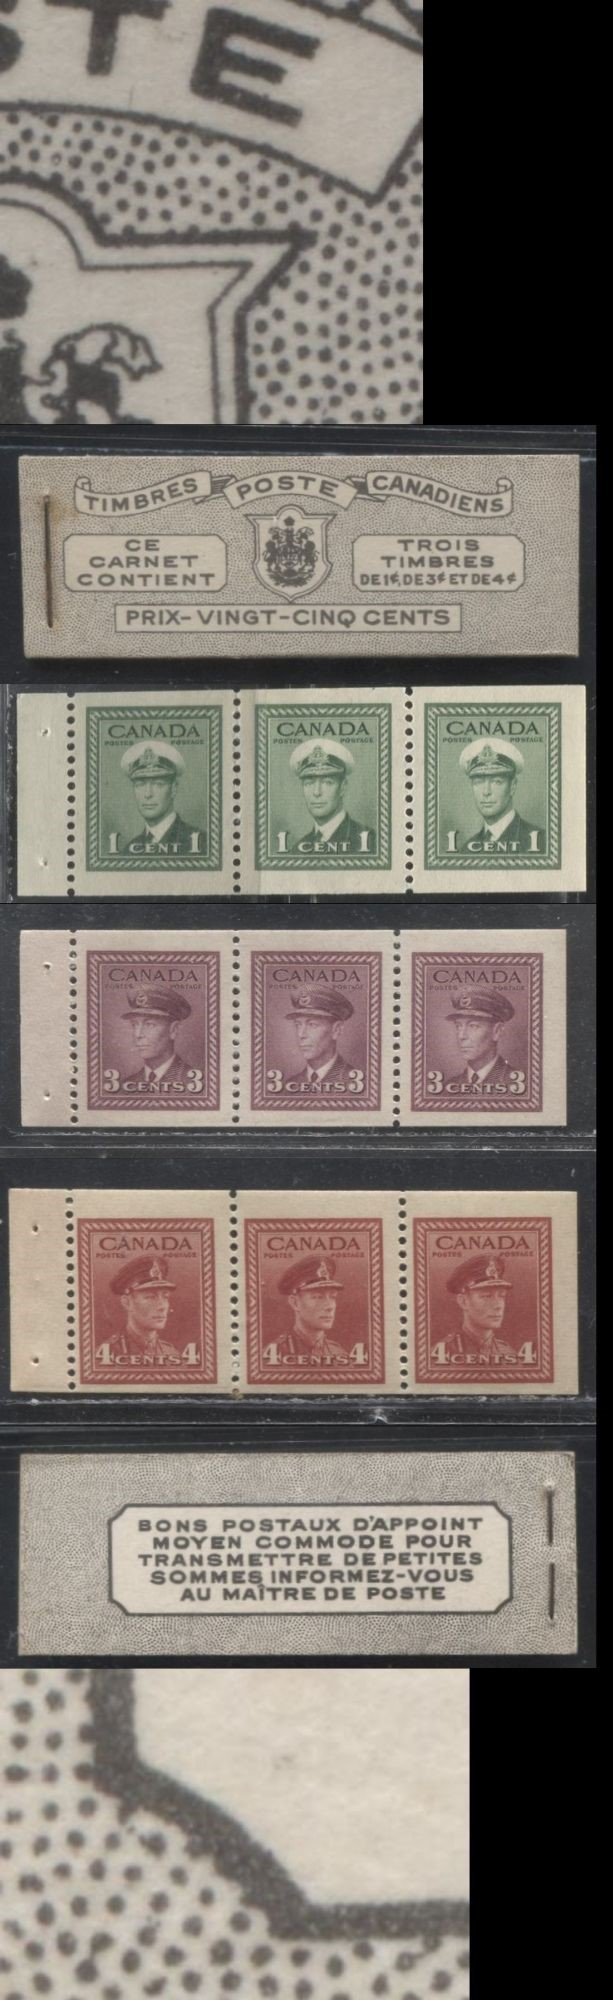 Lot 293 Canada #BK38a 1942-1949 War Issue Complete 25c, French Booklet Containing 1 Pane Each of 3 of 1c Green, 3c Rosy Plum and 4c Carmine Red, Harris Front Cover Type Vh , Back Cover Jiv, 7c & 6c Rate Page